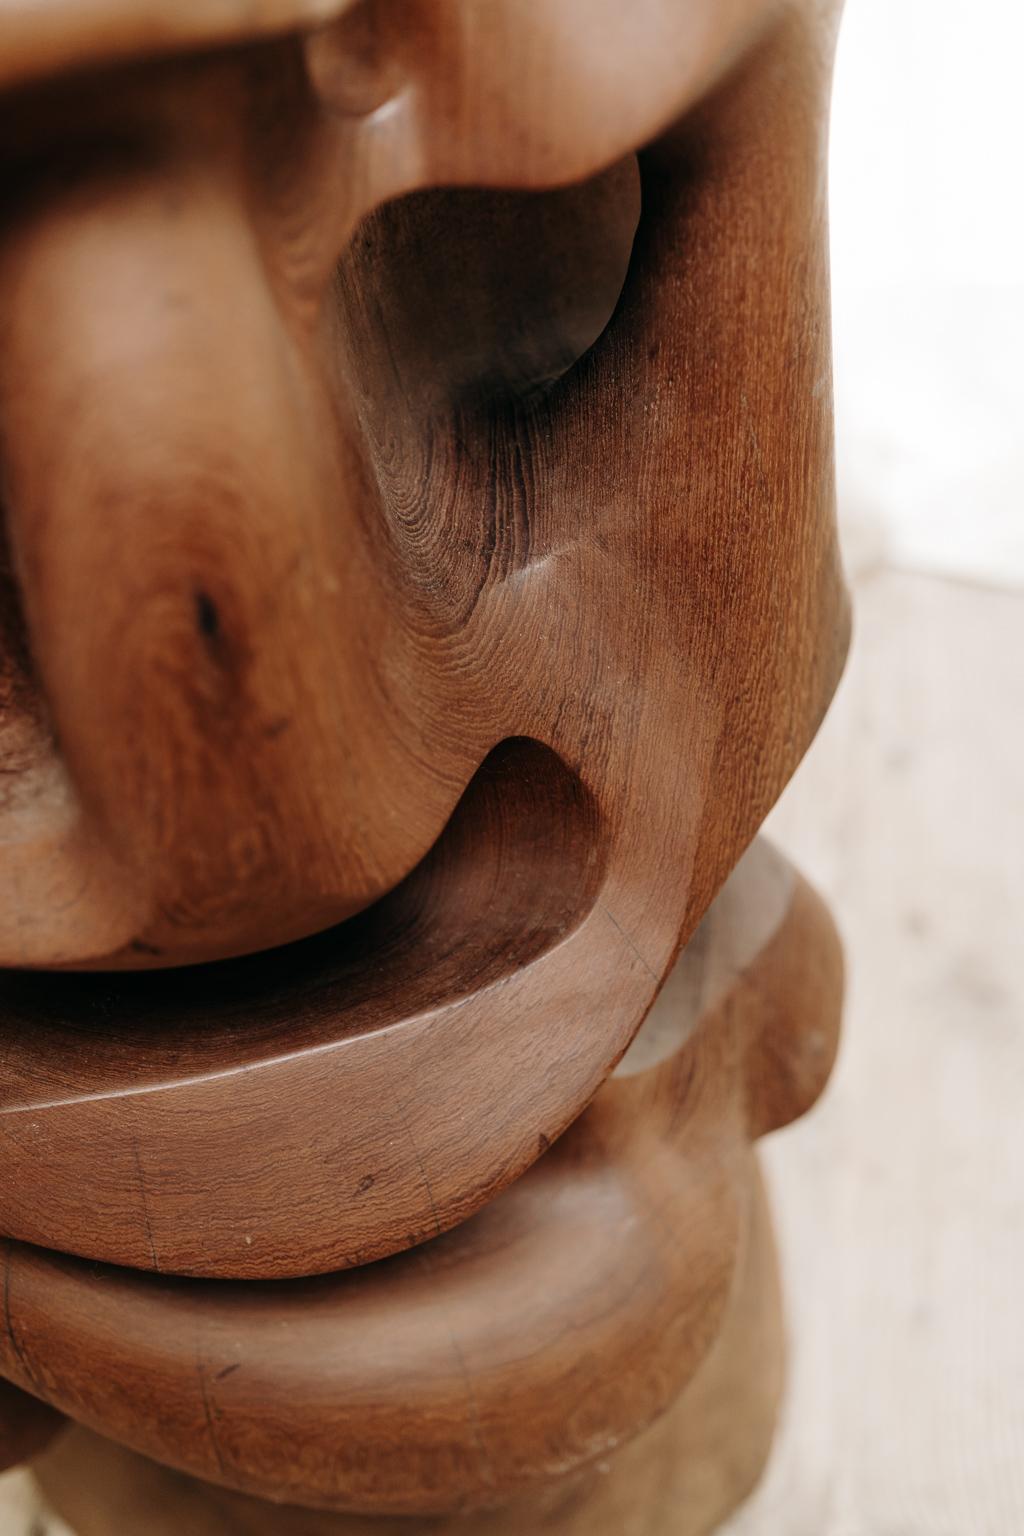 Abstract 1950's Wooden Sculpture 3